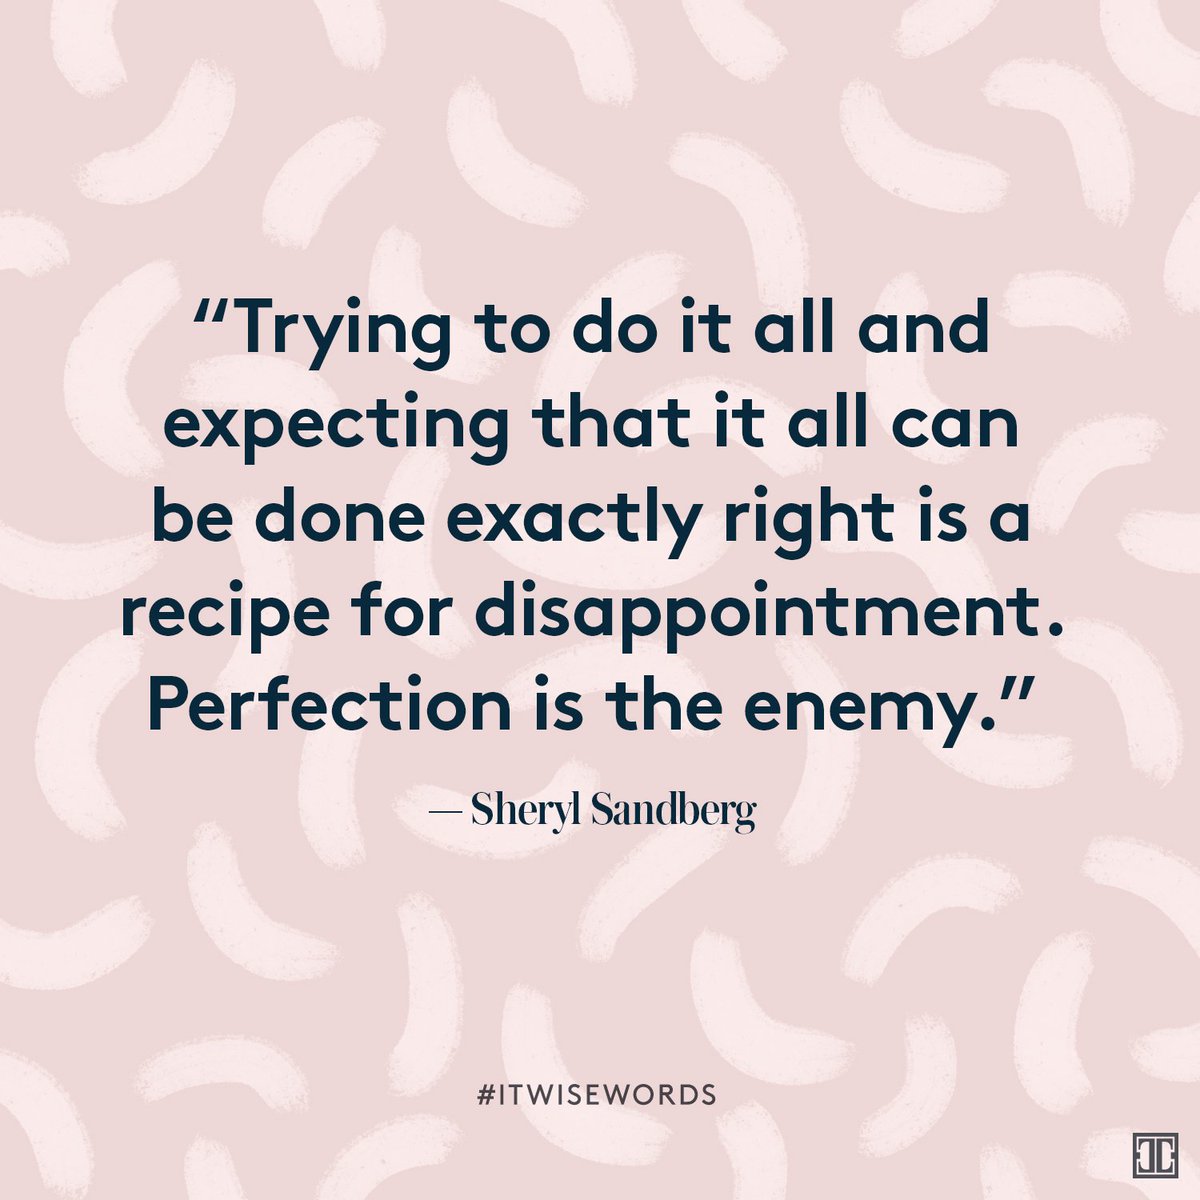 See more #ITwisewords: https://t.co/nKXNZNLNPi #quote #inspiration @sherylsandberg https://t.co/5ANr1elzpQ